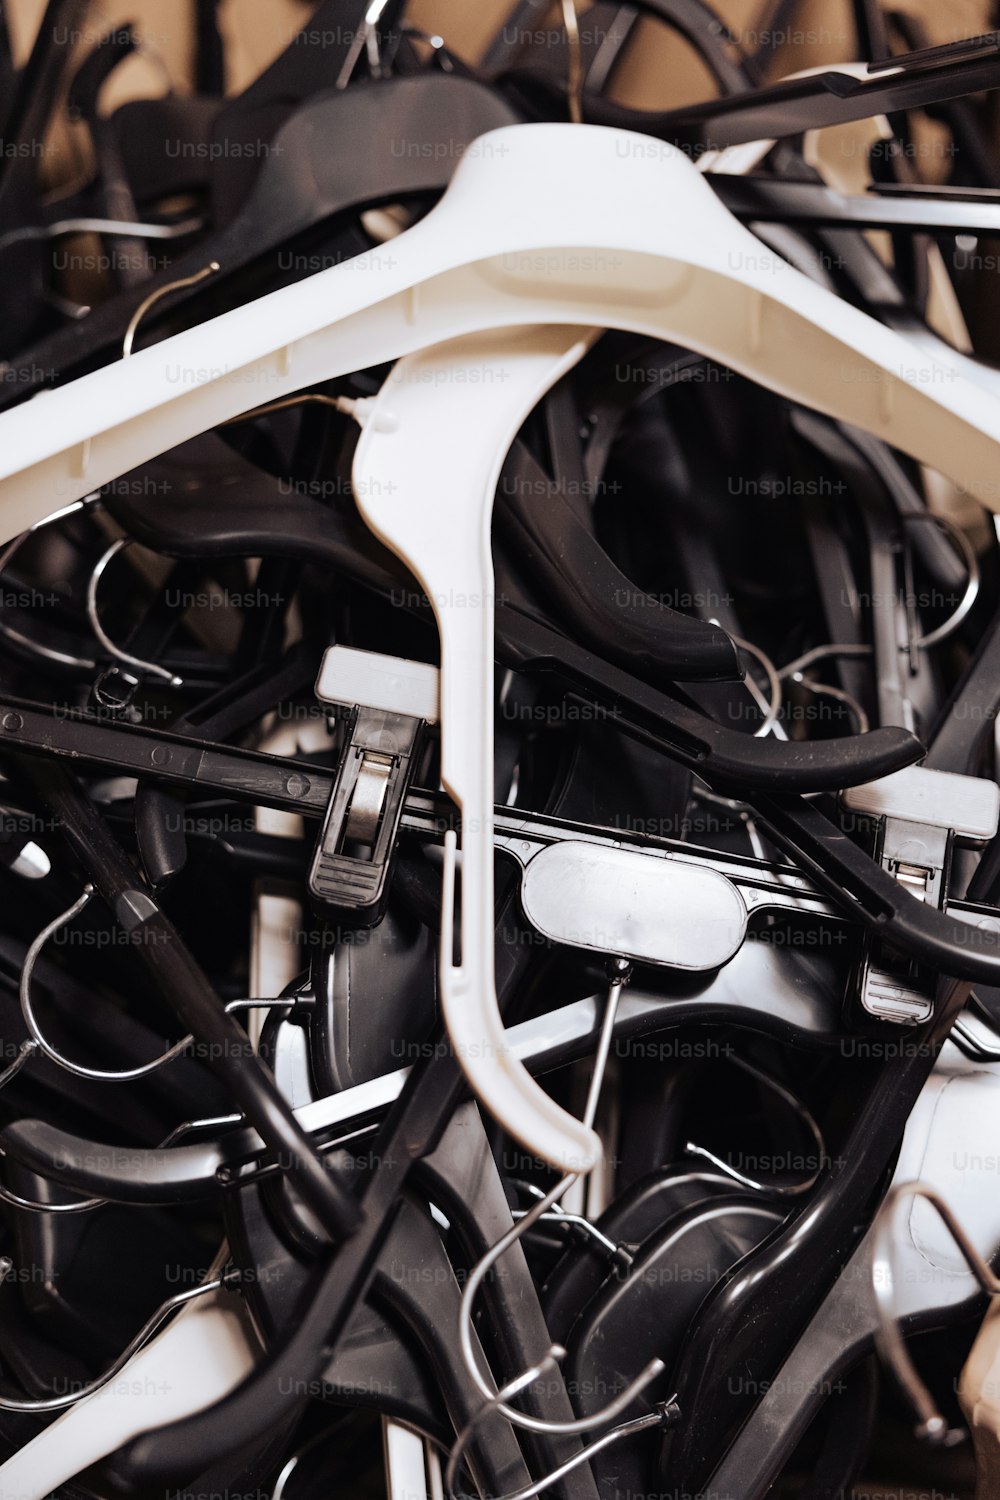 a pile of black and white wires and cords